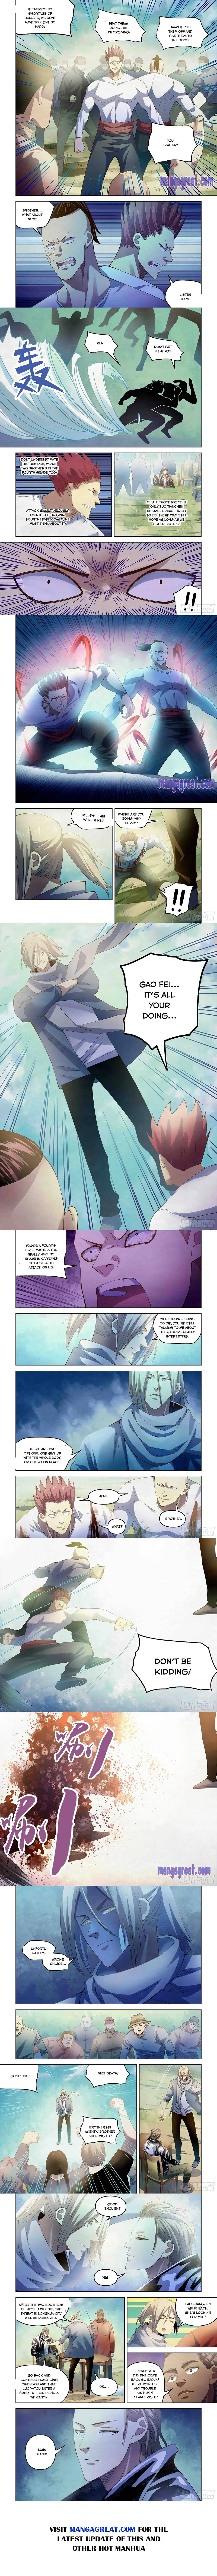 The Last Human Chapter 339 page 2